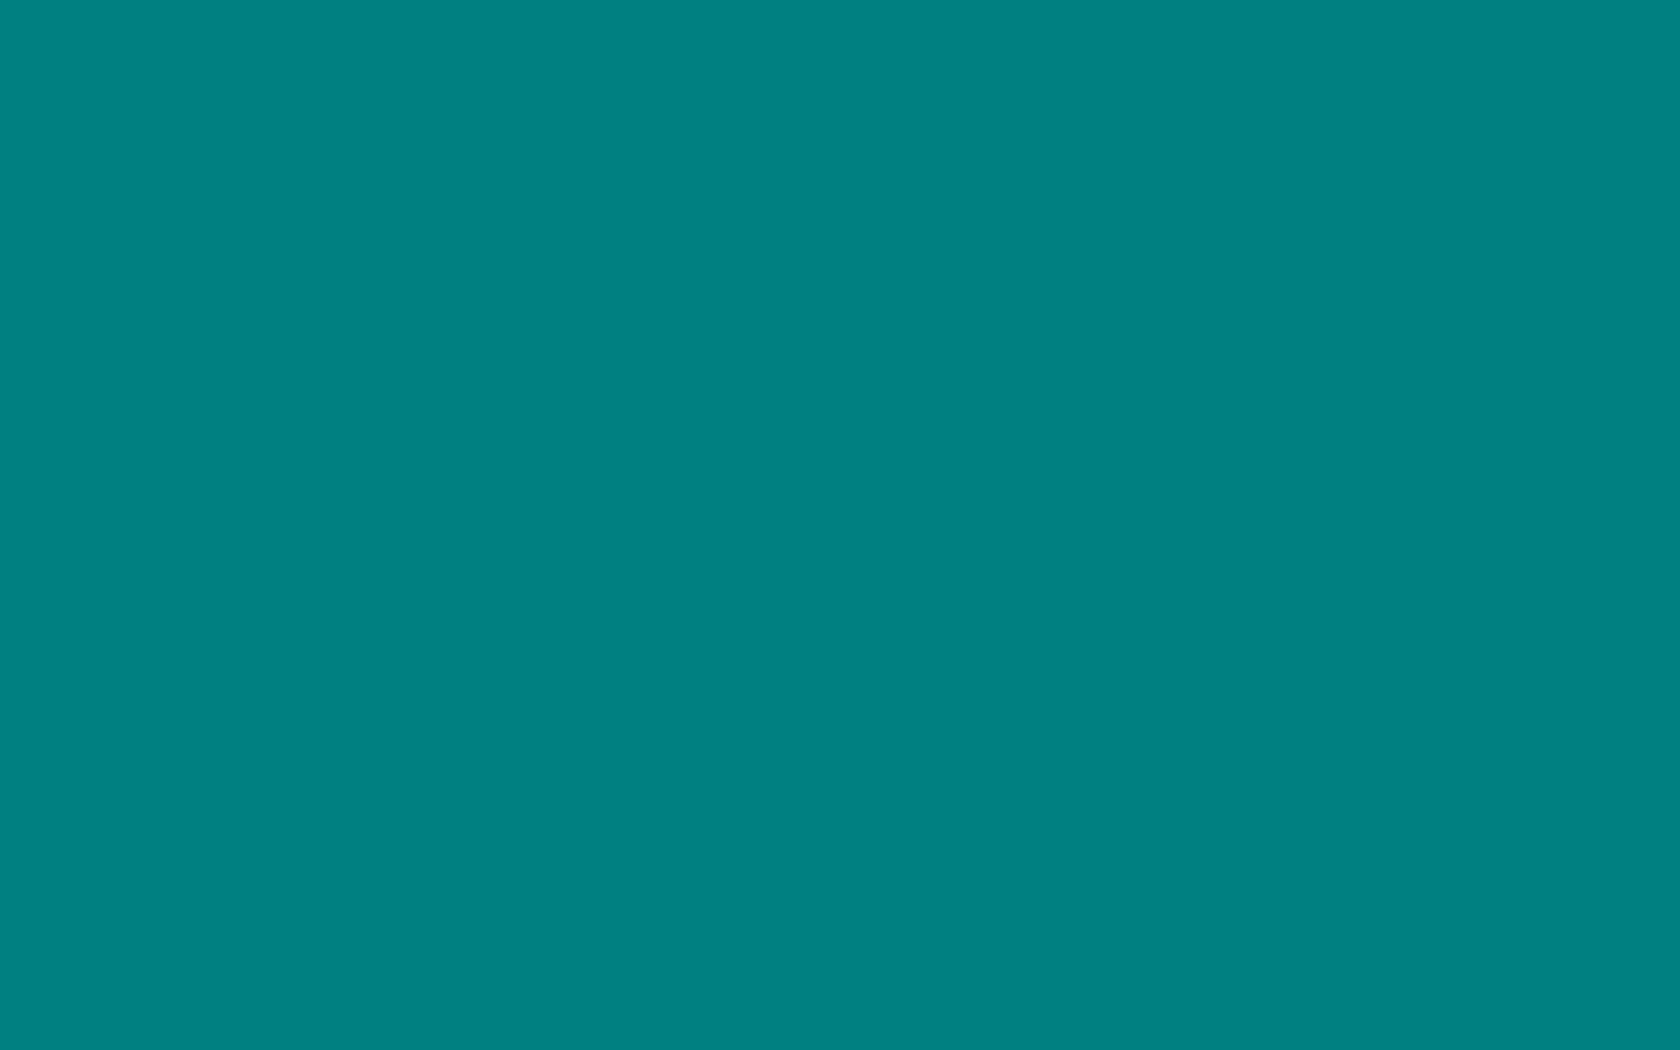 Teal Solid Color Background And The Below